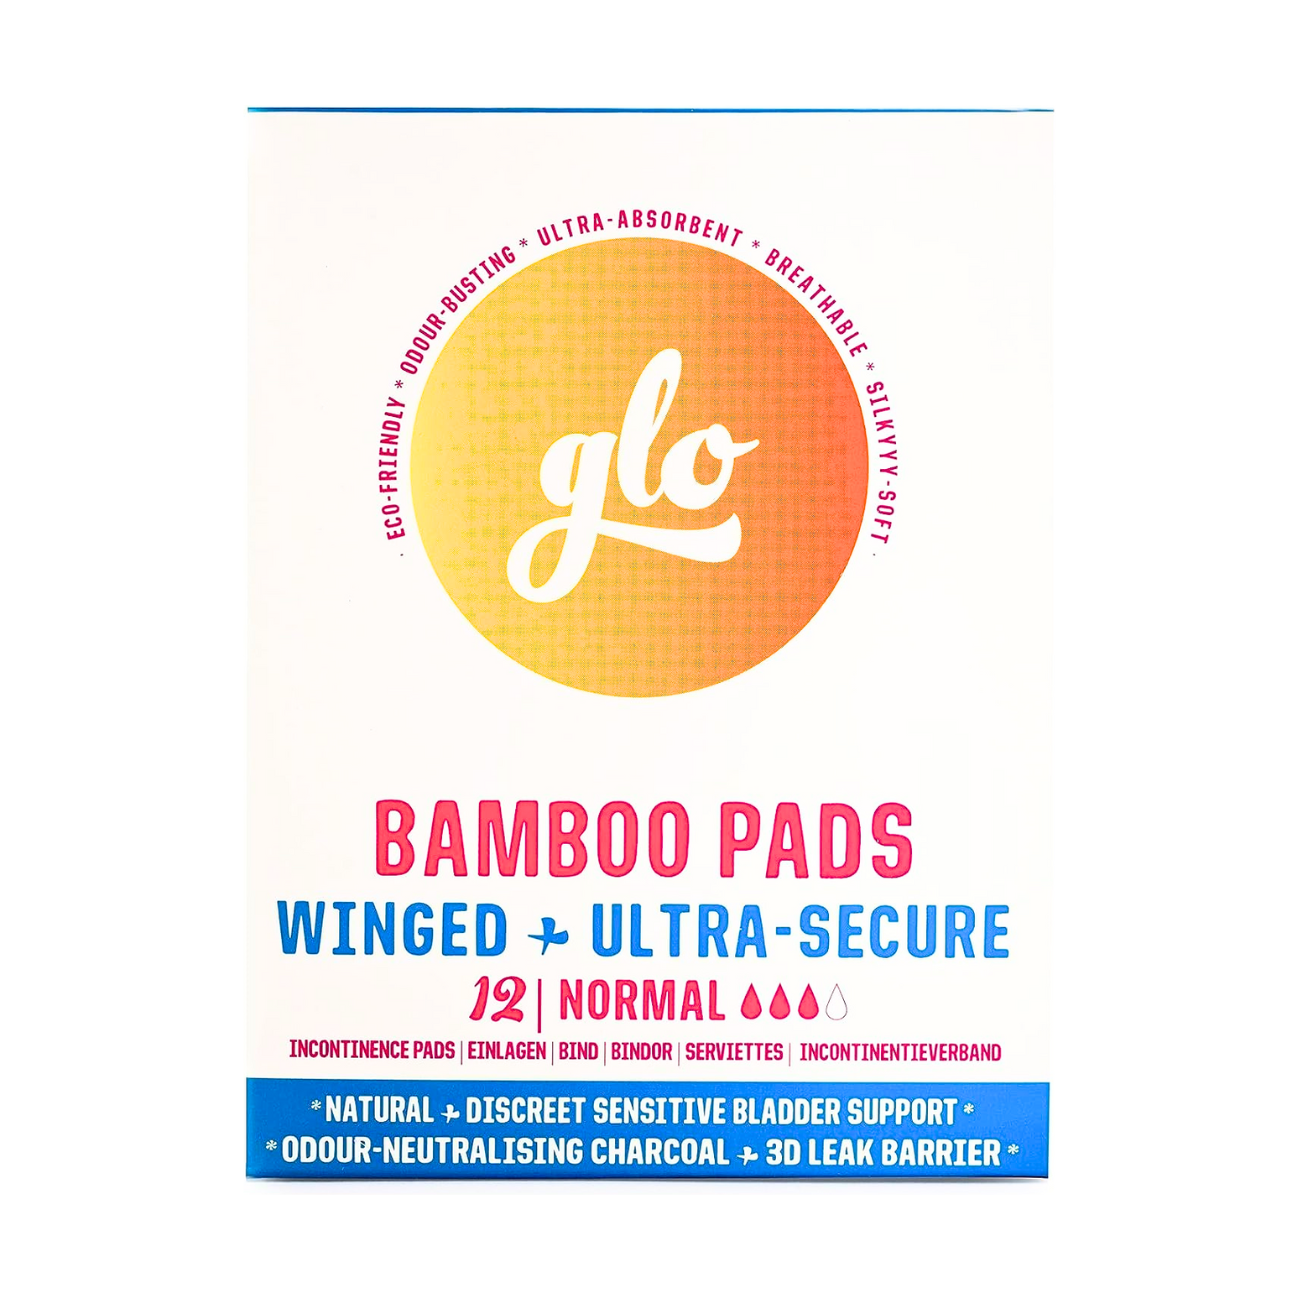 Glo Bamboo Pads for Sensitive Bladder (12 pads)